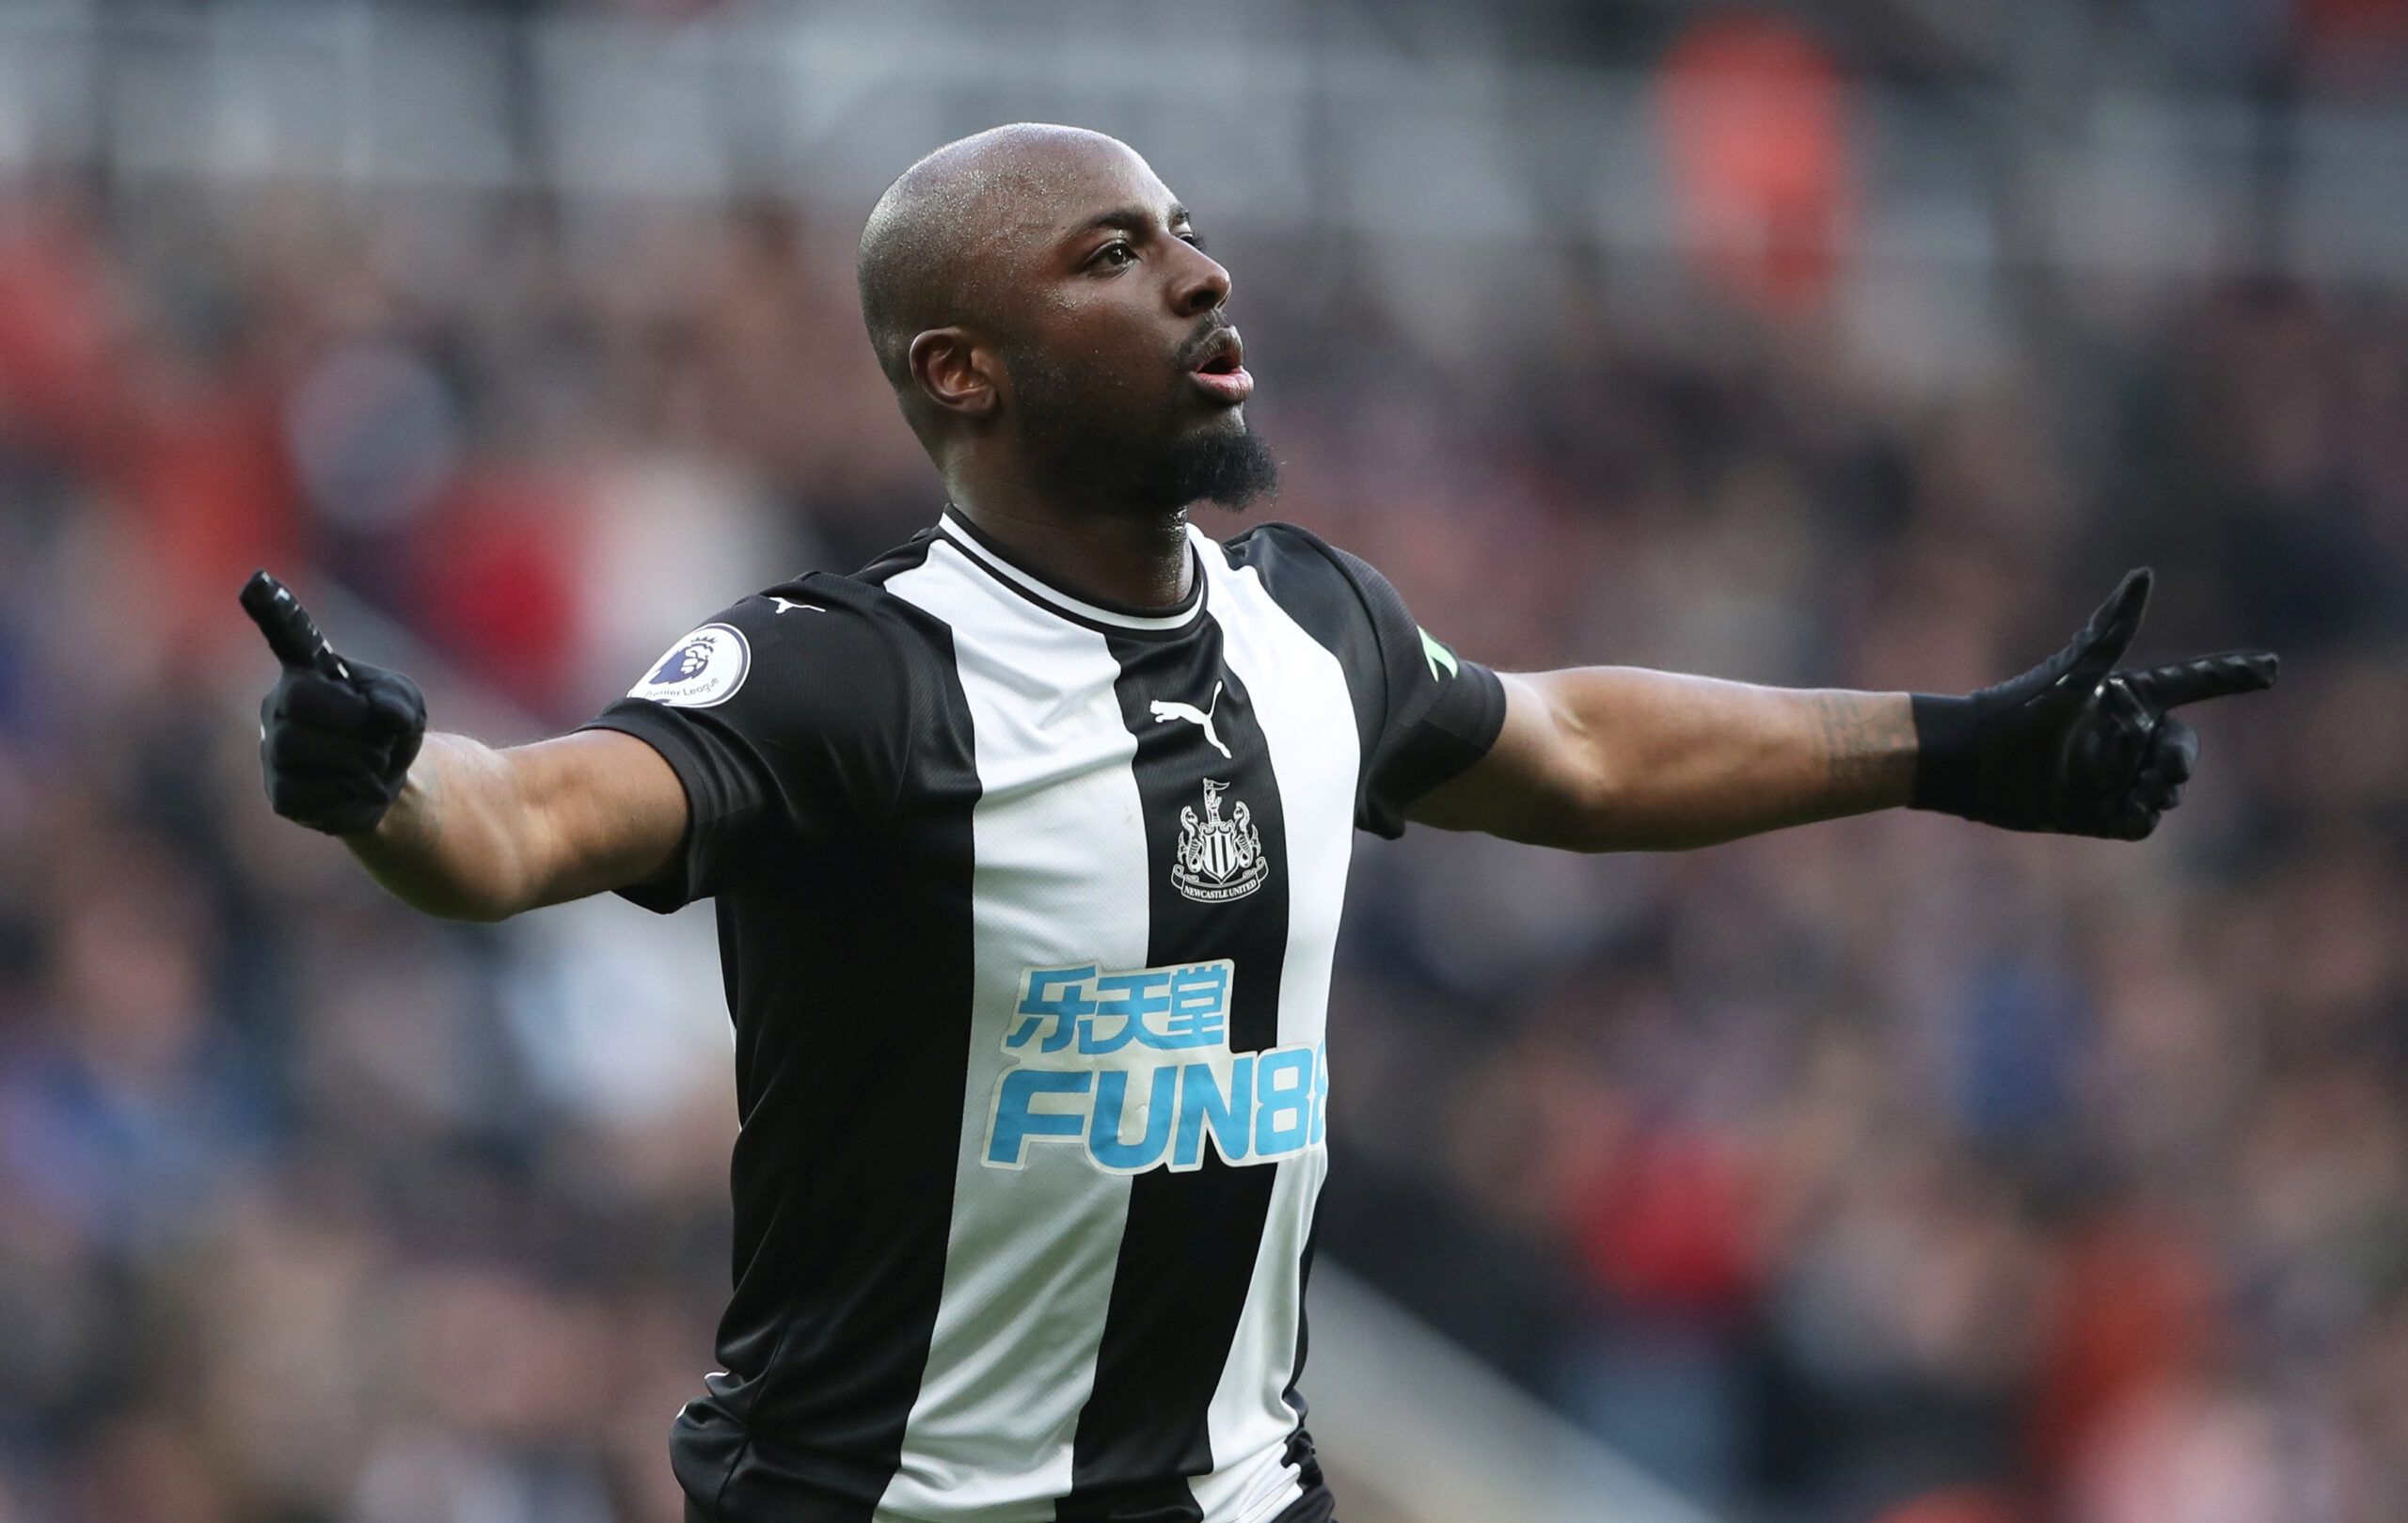 Soccer Football - Premier League - Newcastle United v Manchester City - St James' Park, Newcastle, Britain - November 30, 2019  Newcastle United's Jetro Willems celebrates scoring their first goal  REUTERS/Scott Heppell  EDITORIAL USE ONLY. No use with unauthorized audio, video, data, fixture lists, club/league logos or 